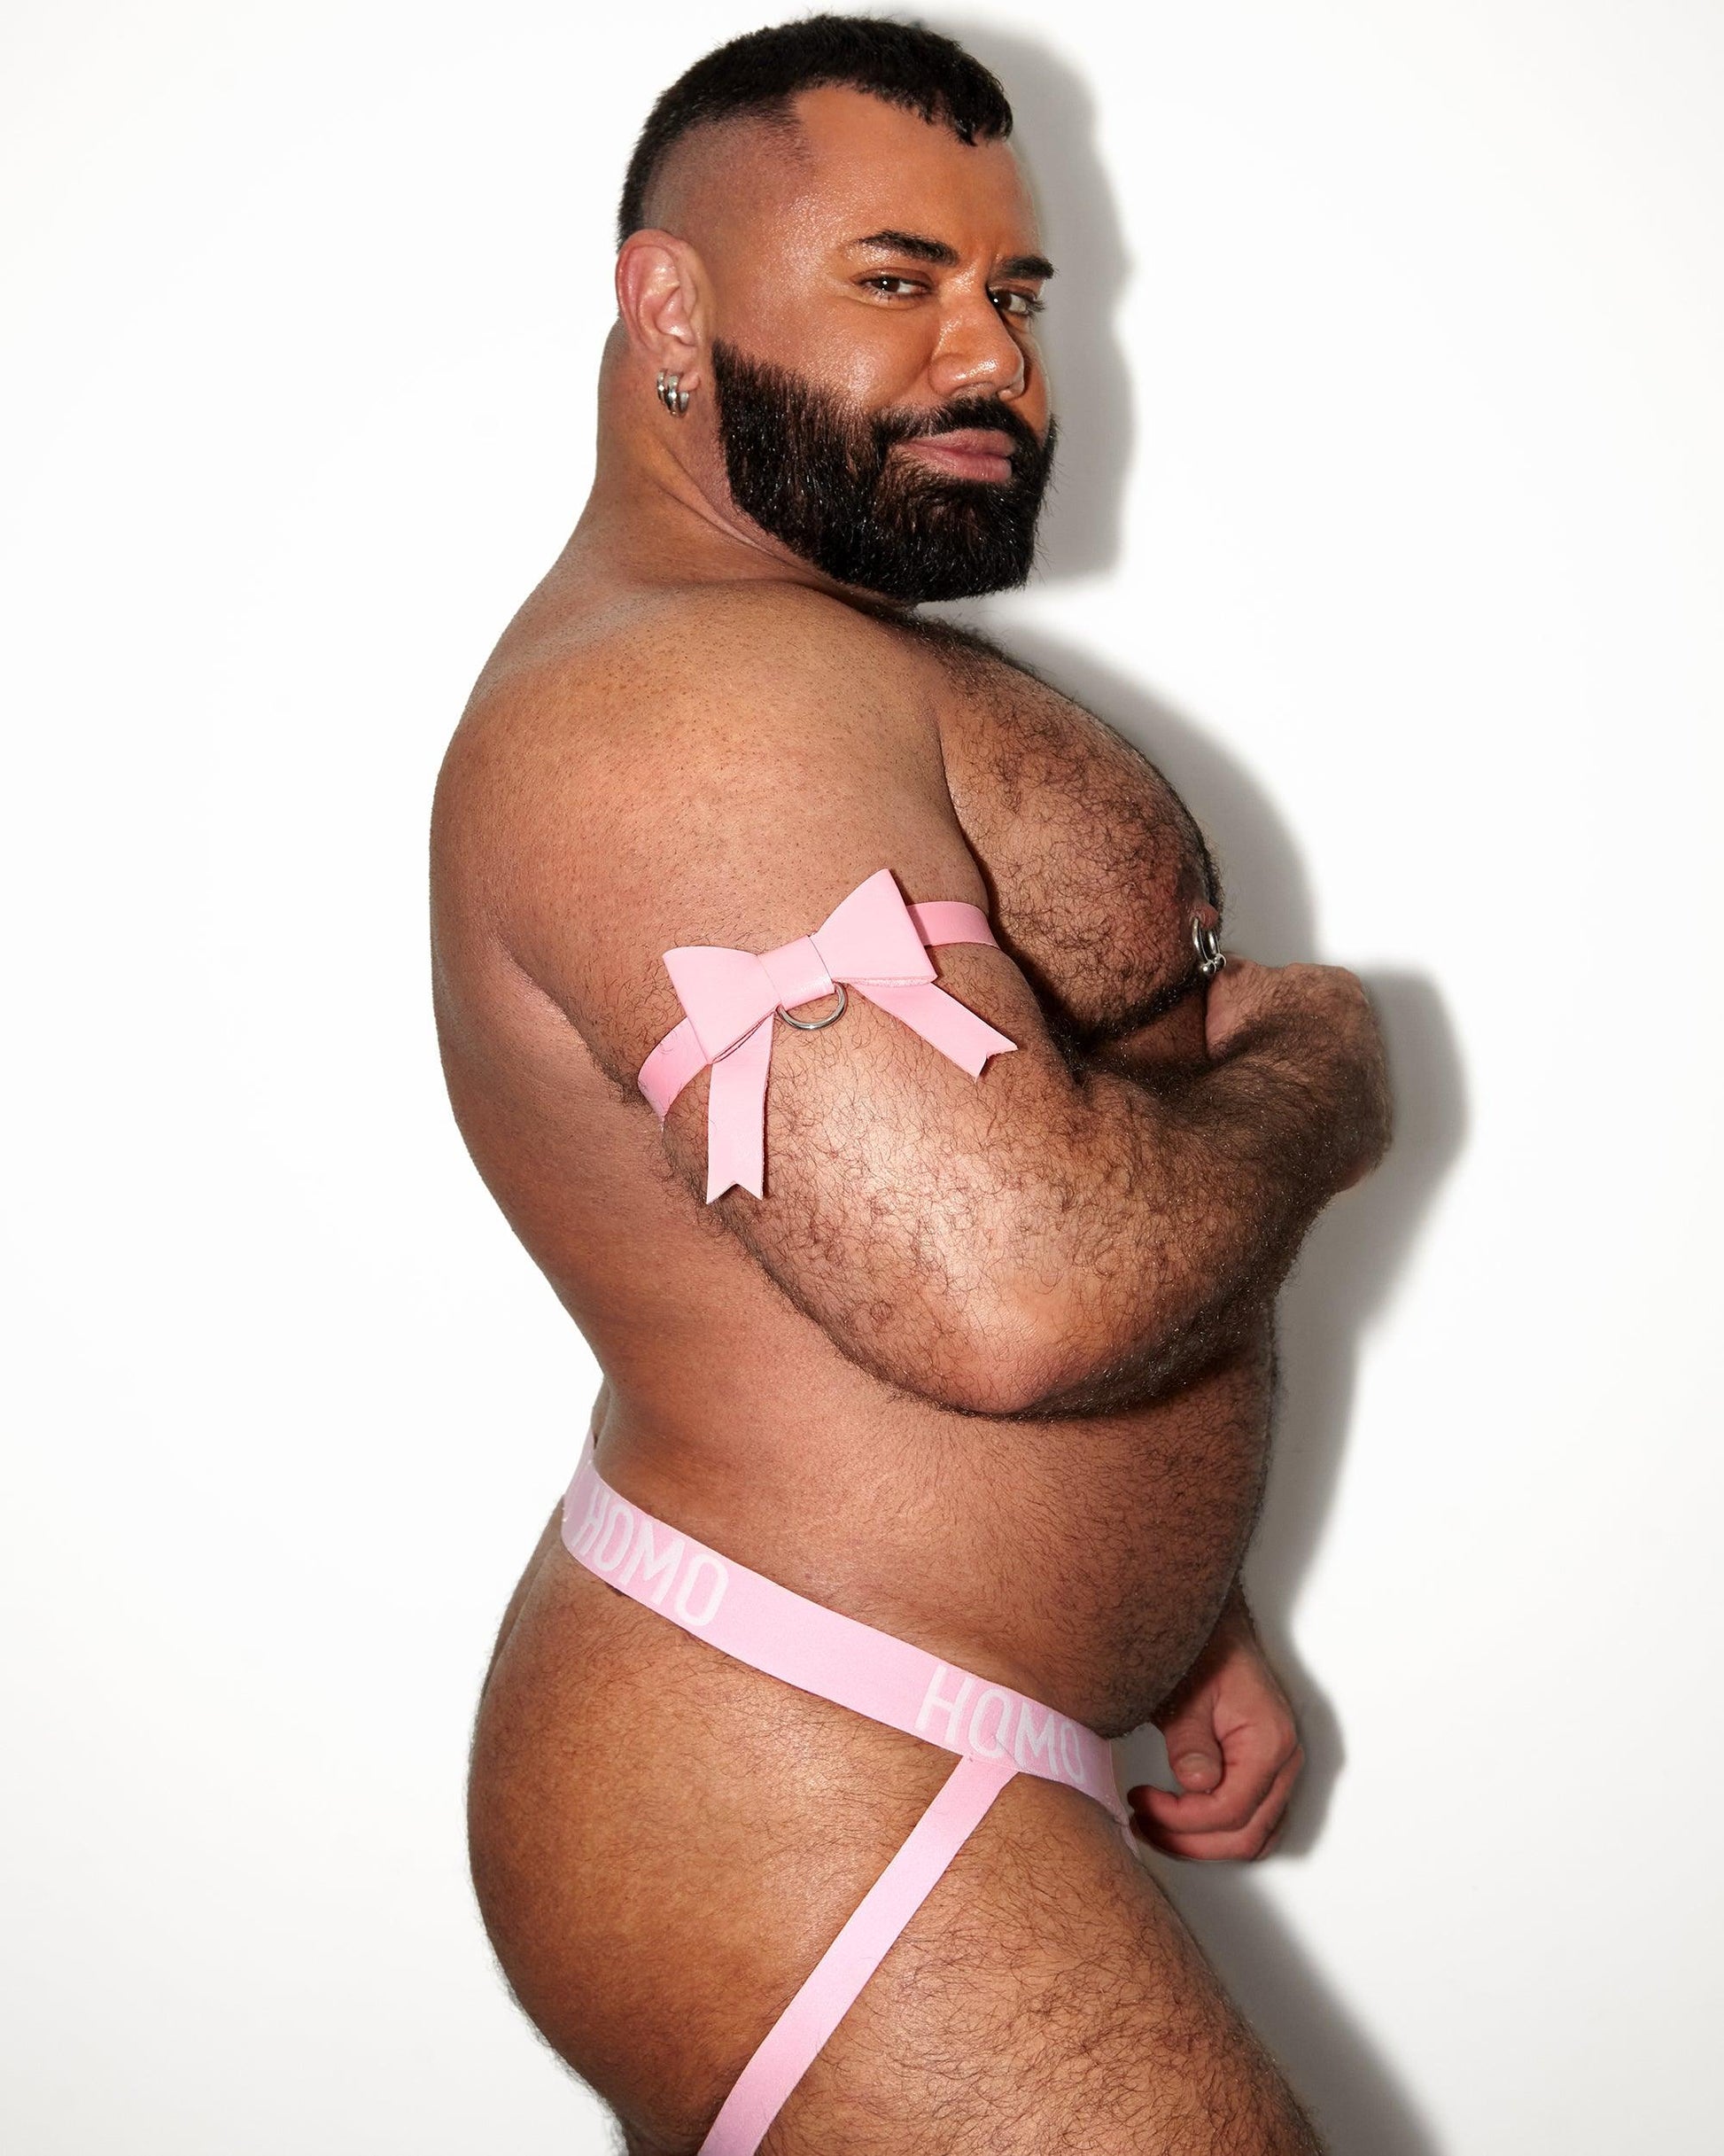 Get the look! Pink bow outfit. Includes bicep bands and classic jock - HOMOLONDON